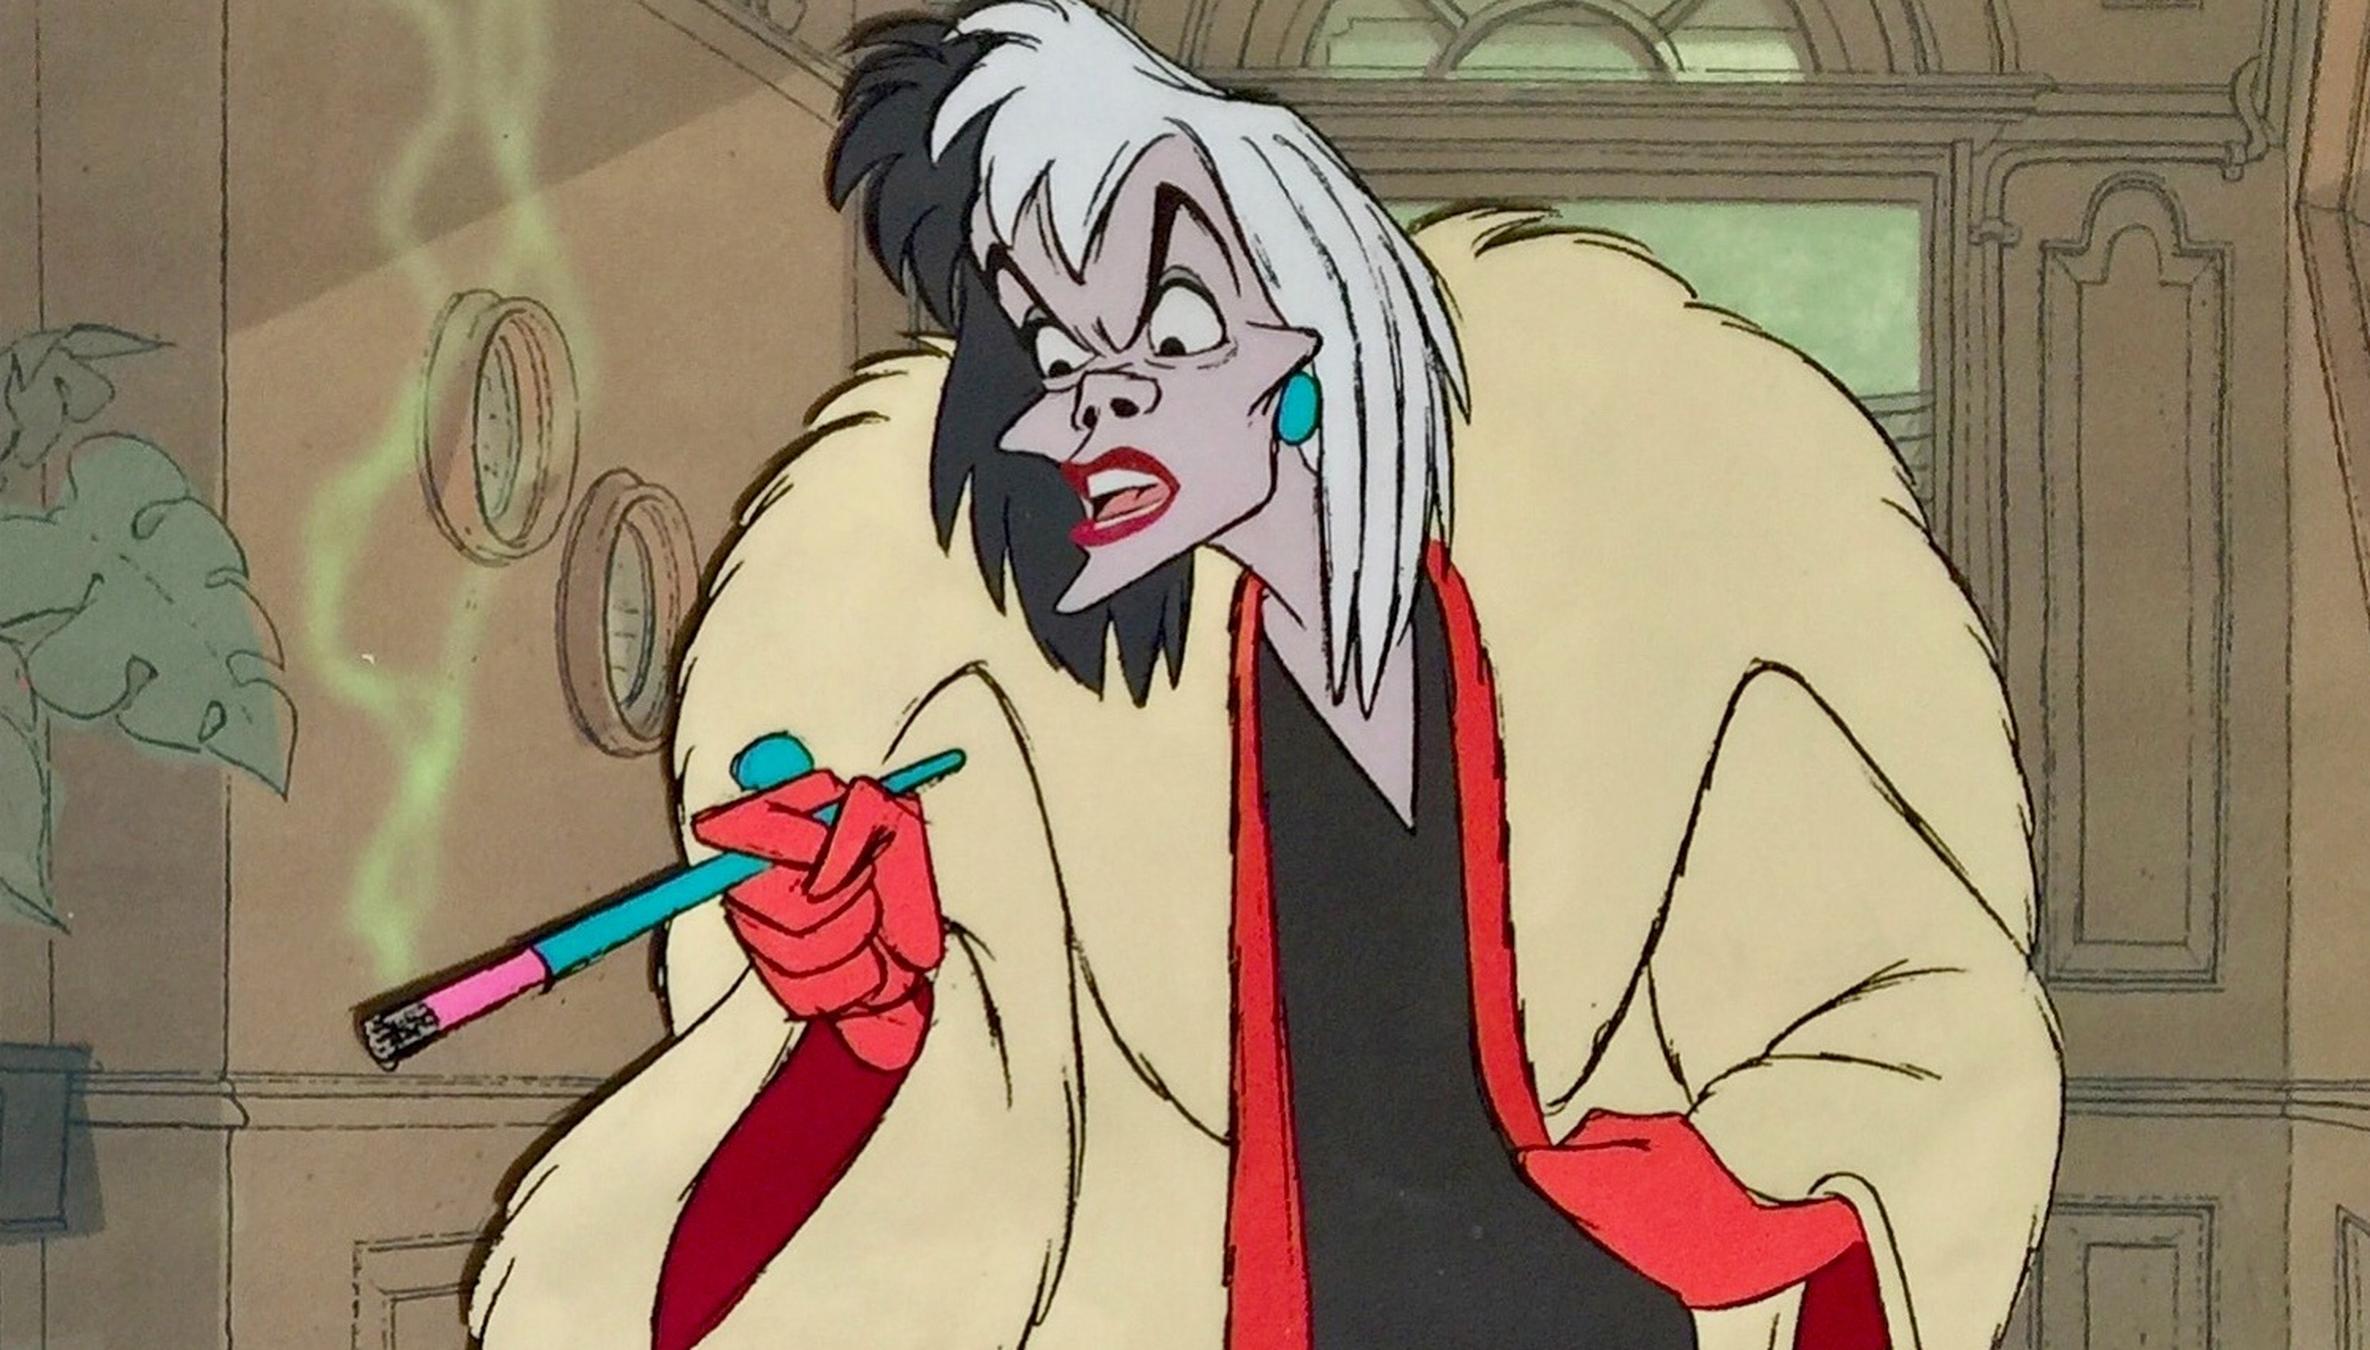 101 Dalmations: Emma Stone to play Cruella de Vil for Disney in origins  story, The Independent